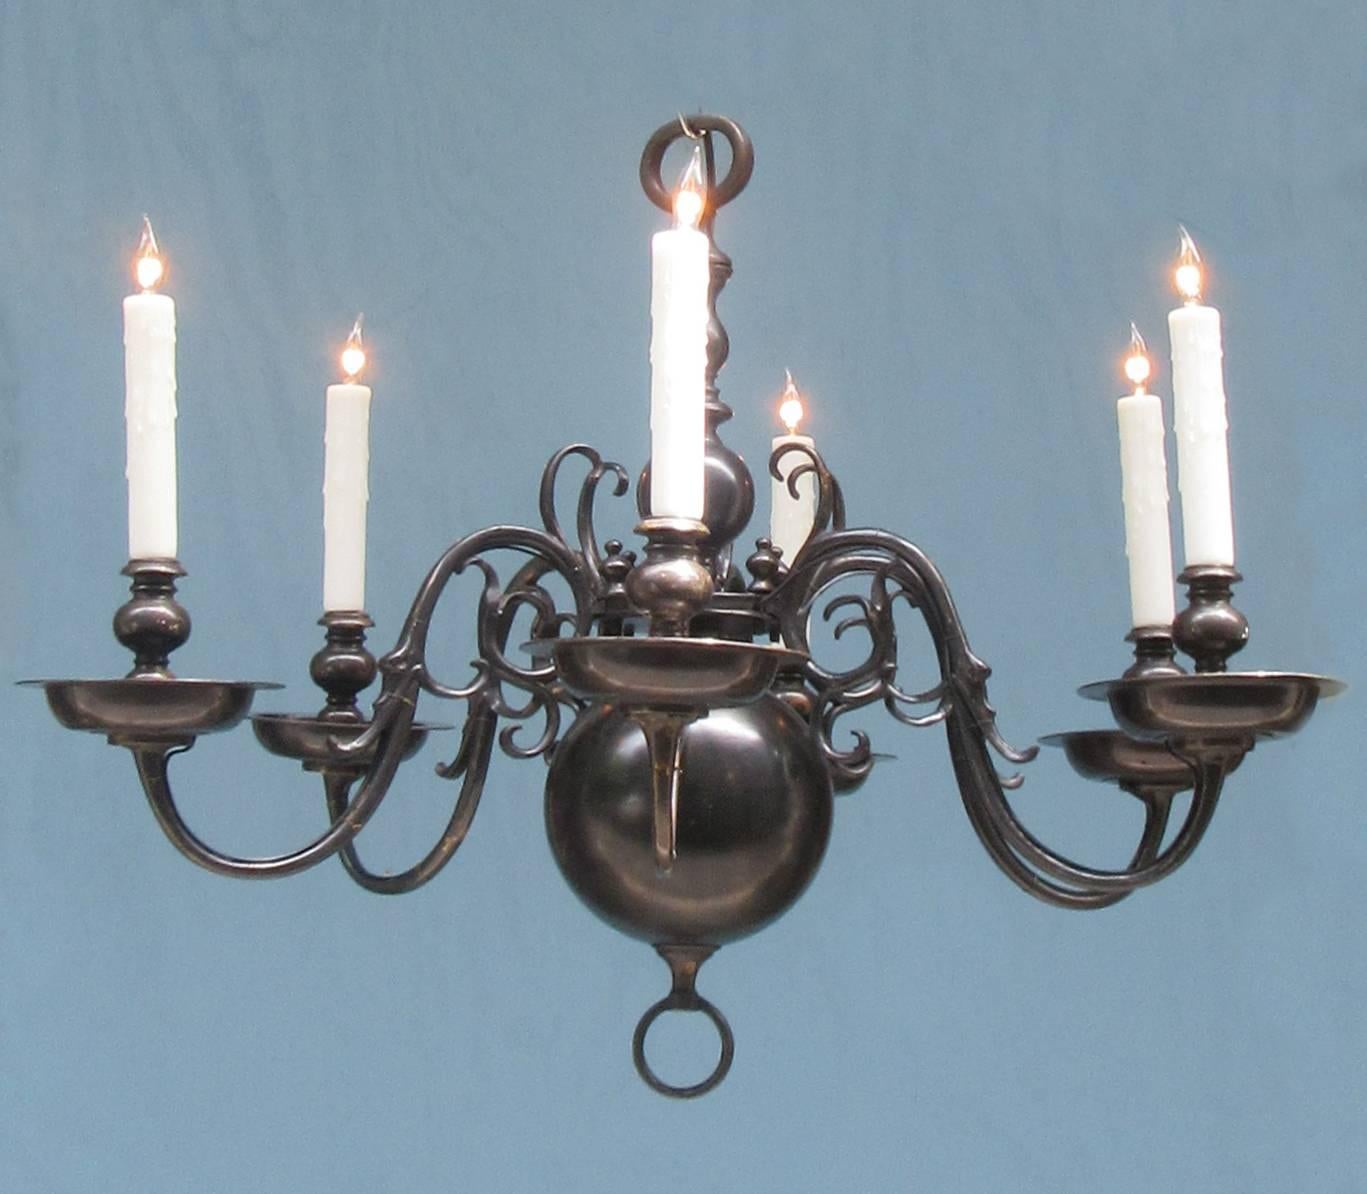 An early 20th century American chandelier in Dutch Colonial style, circa 1910, with eliptical shaped top ring and bulbous black patinated body featuring six candle arms adorned with foliate scrollwork. The chandelier has recently been rewired with